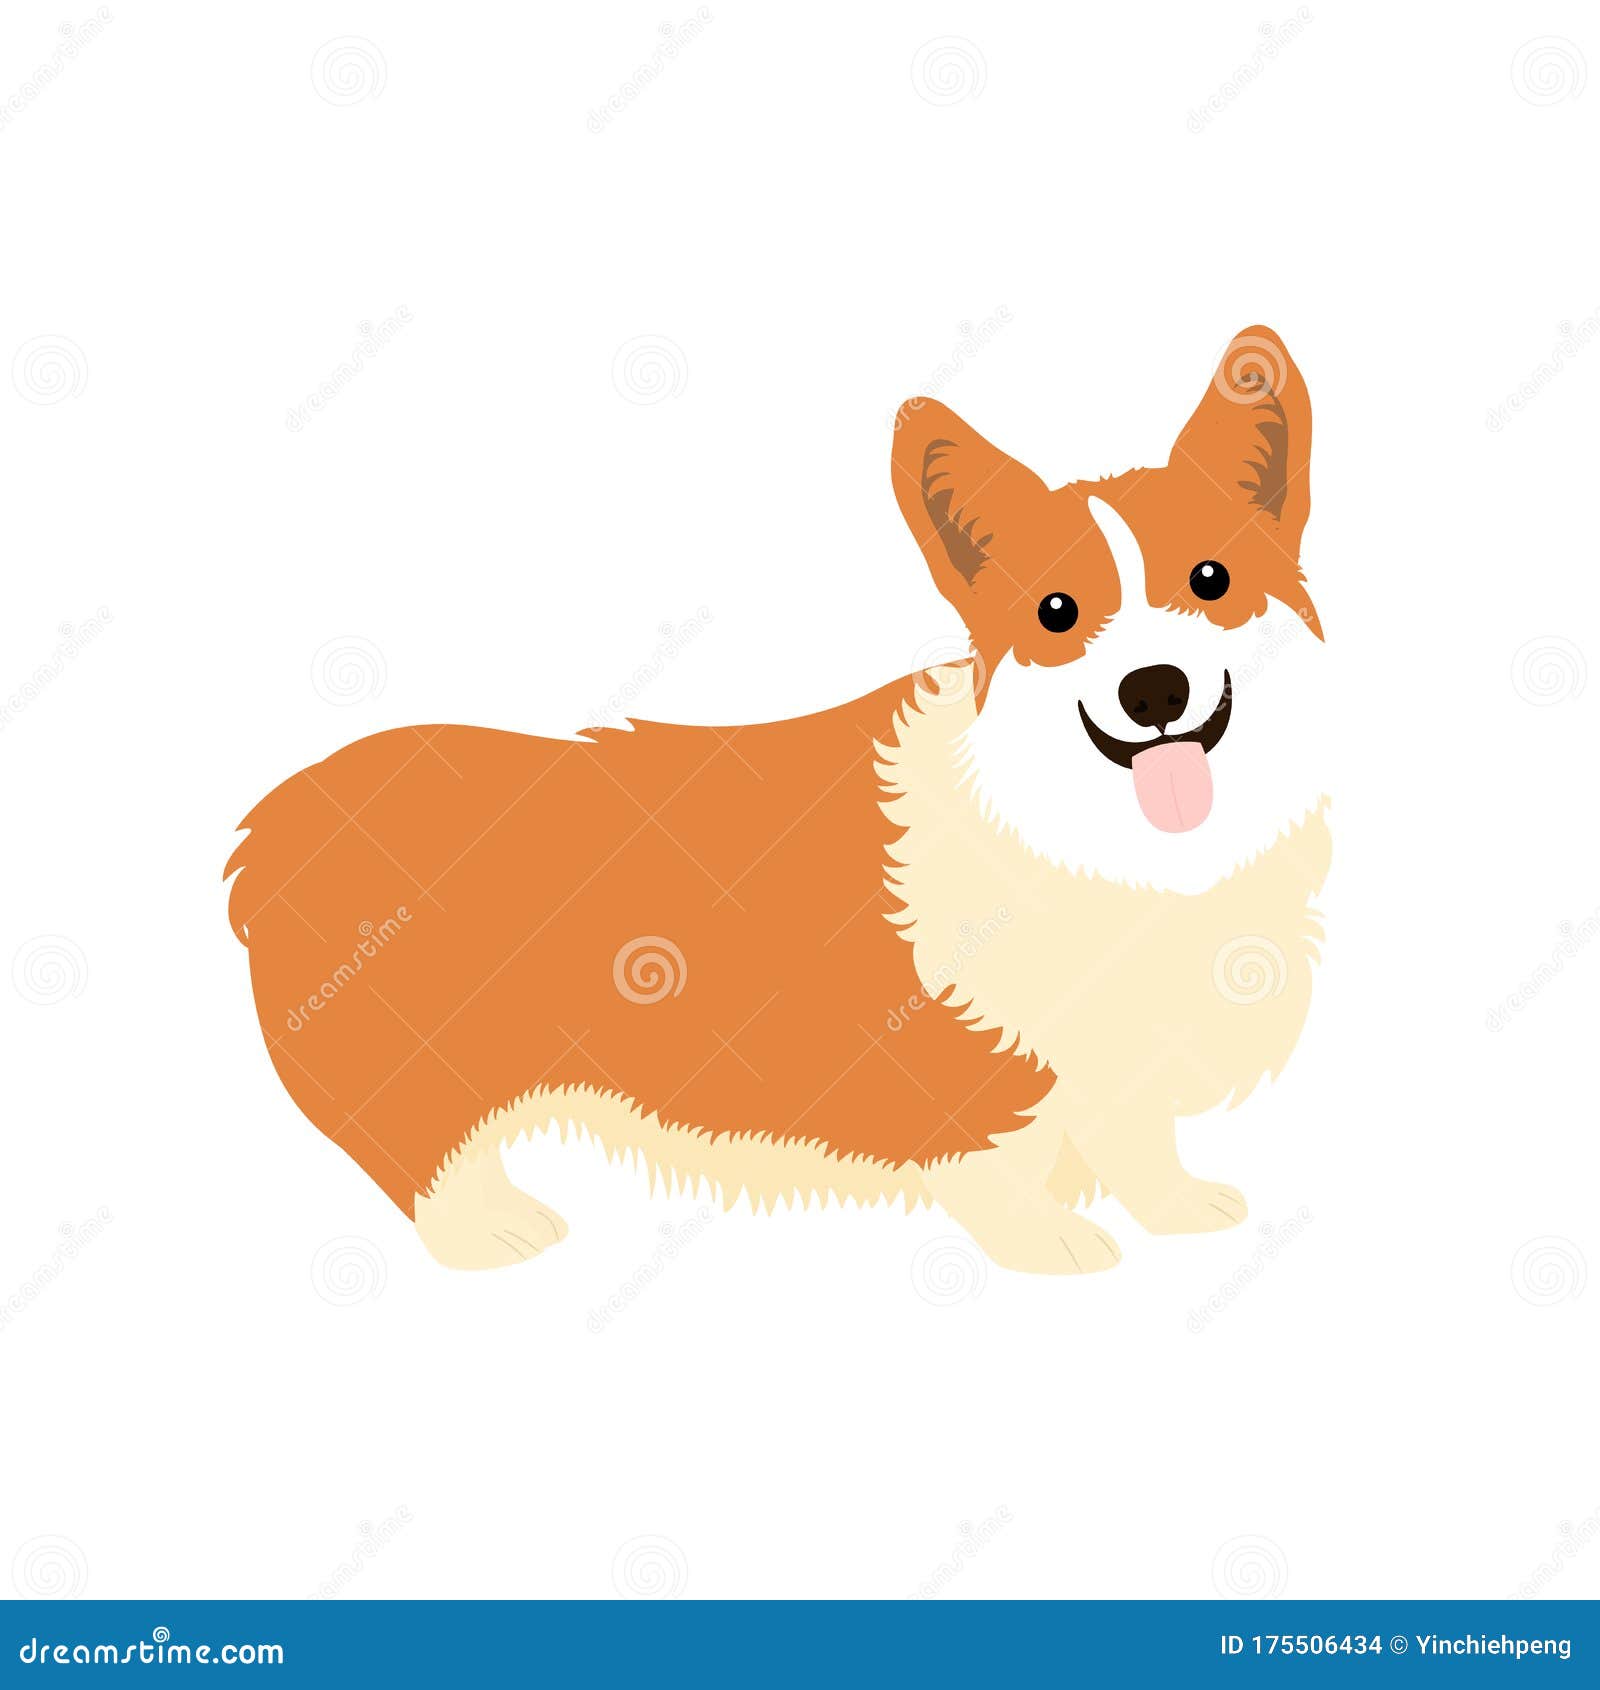 Cartoon funny dog standing on white background Vector Image